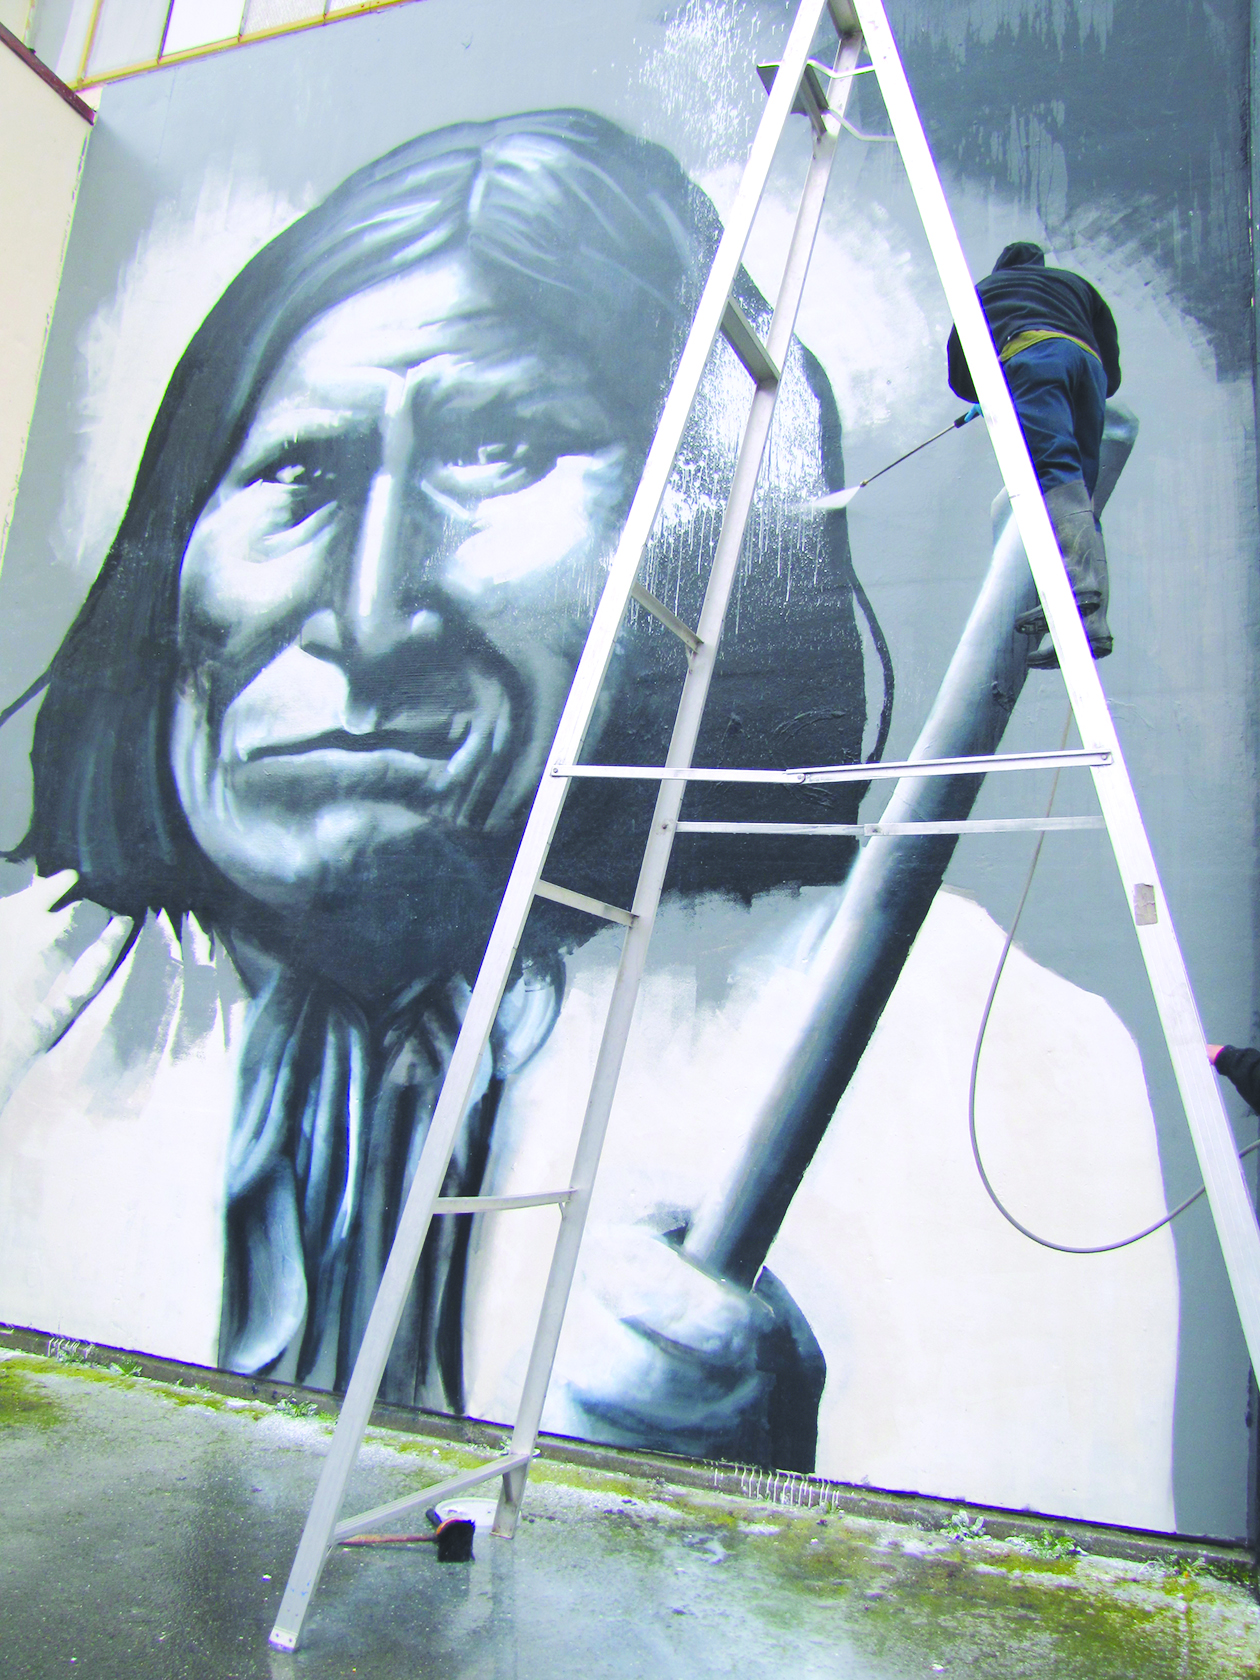 Geronimo stands strong as a worker scrubs away the vandal’s work.